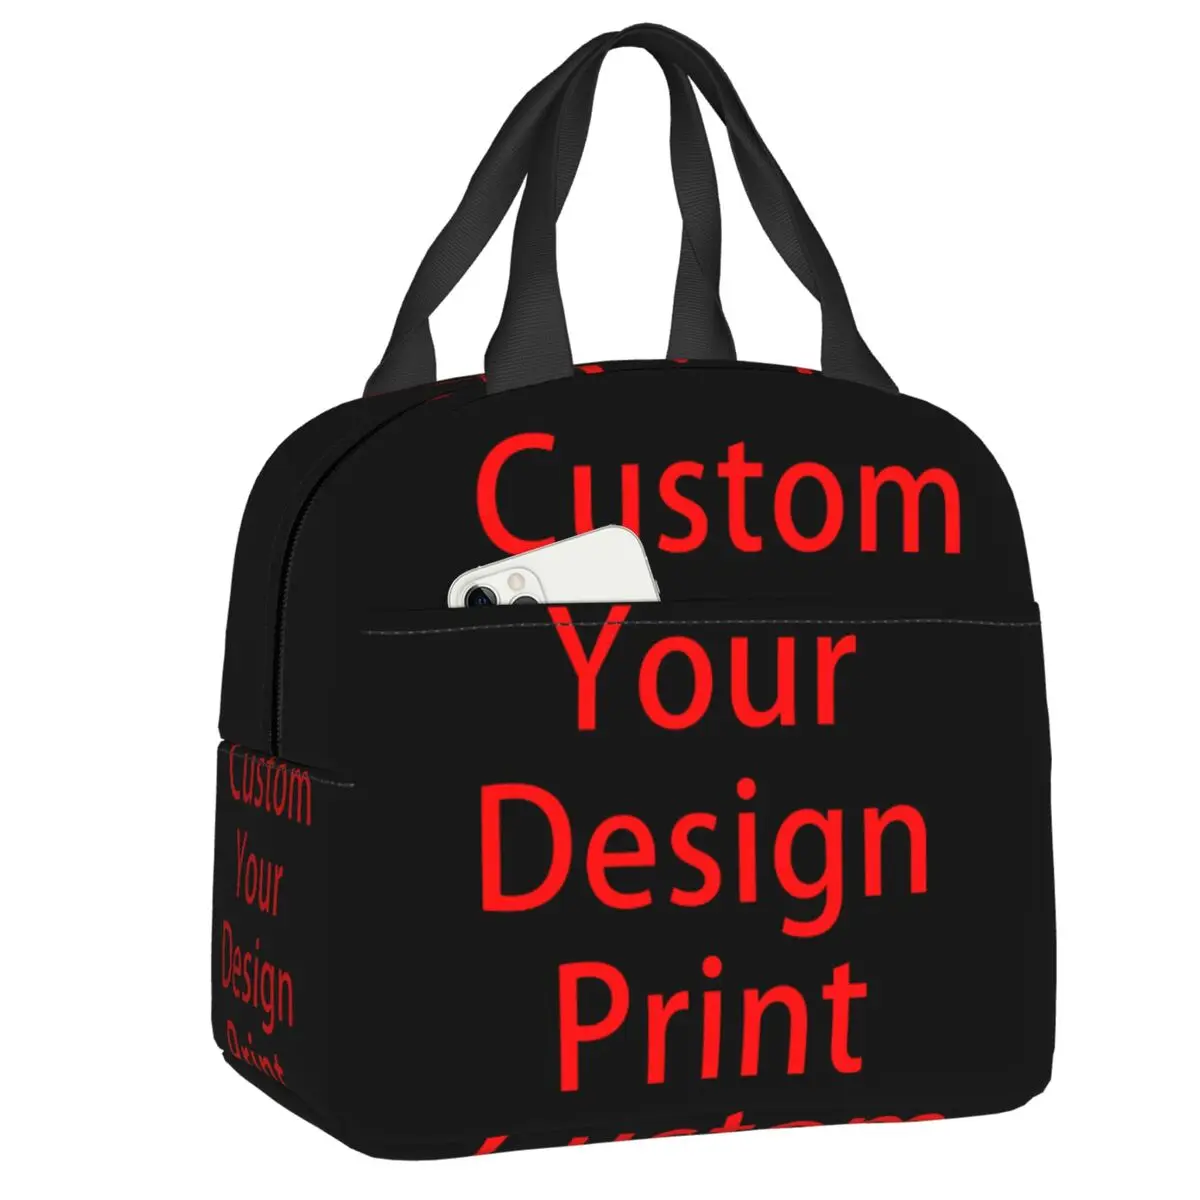 Custom Your Design Print Thermal Insulated Lunch Bag Customized Logo Portable Lunch Tote for School Office Storage Food Box